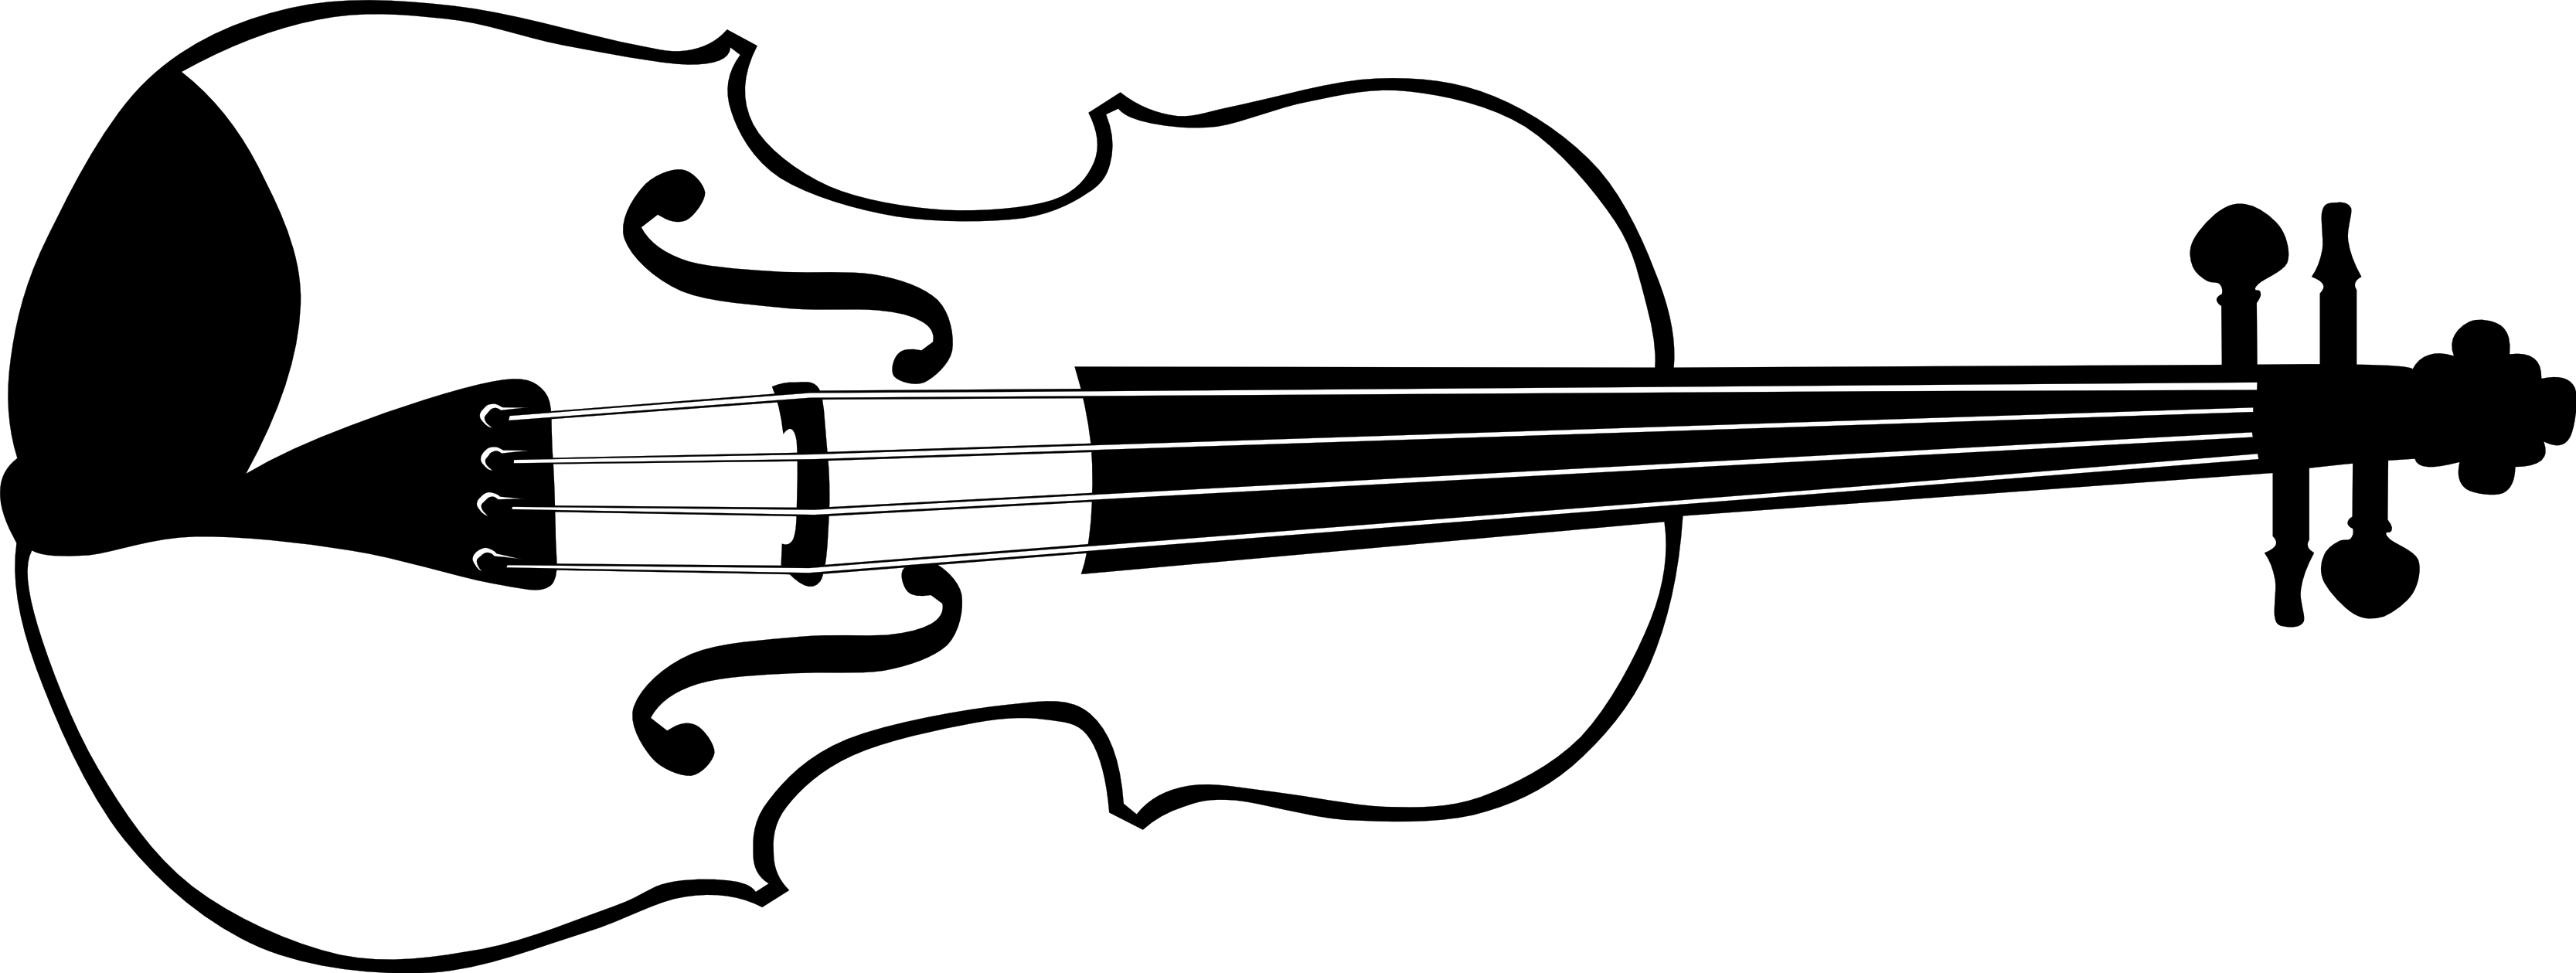 Violin clipart black and white free images